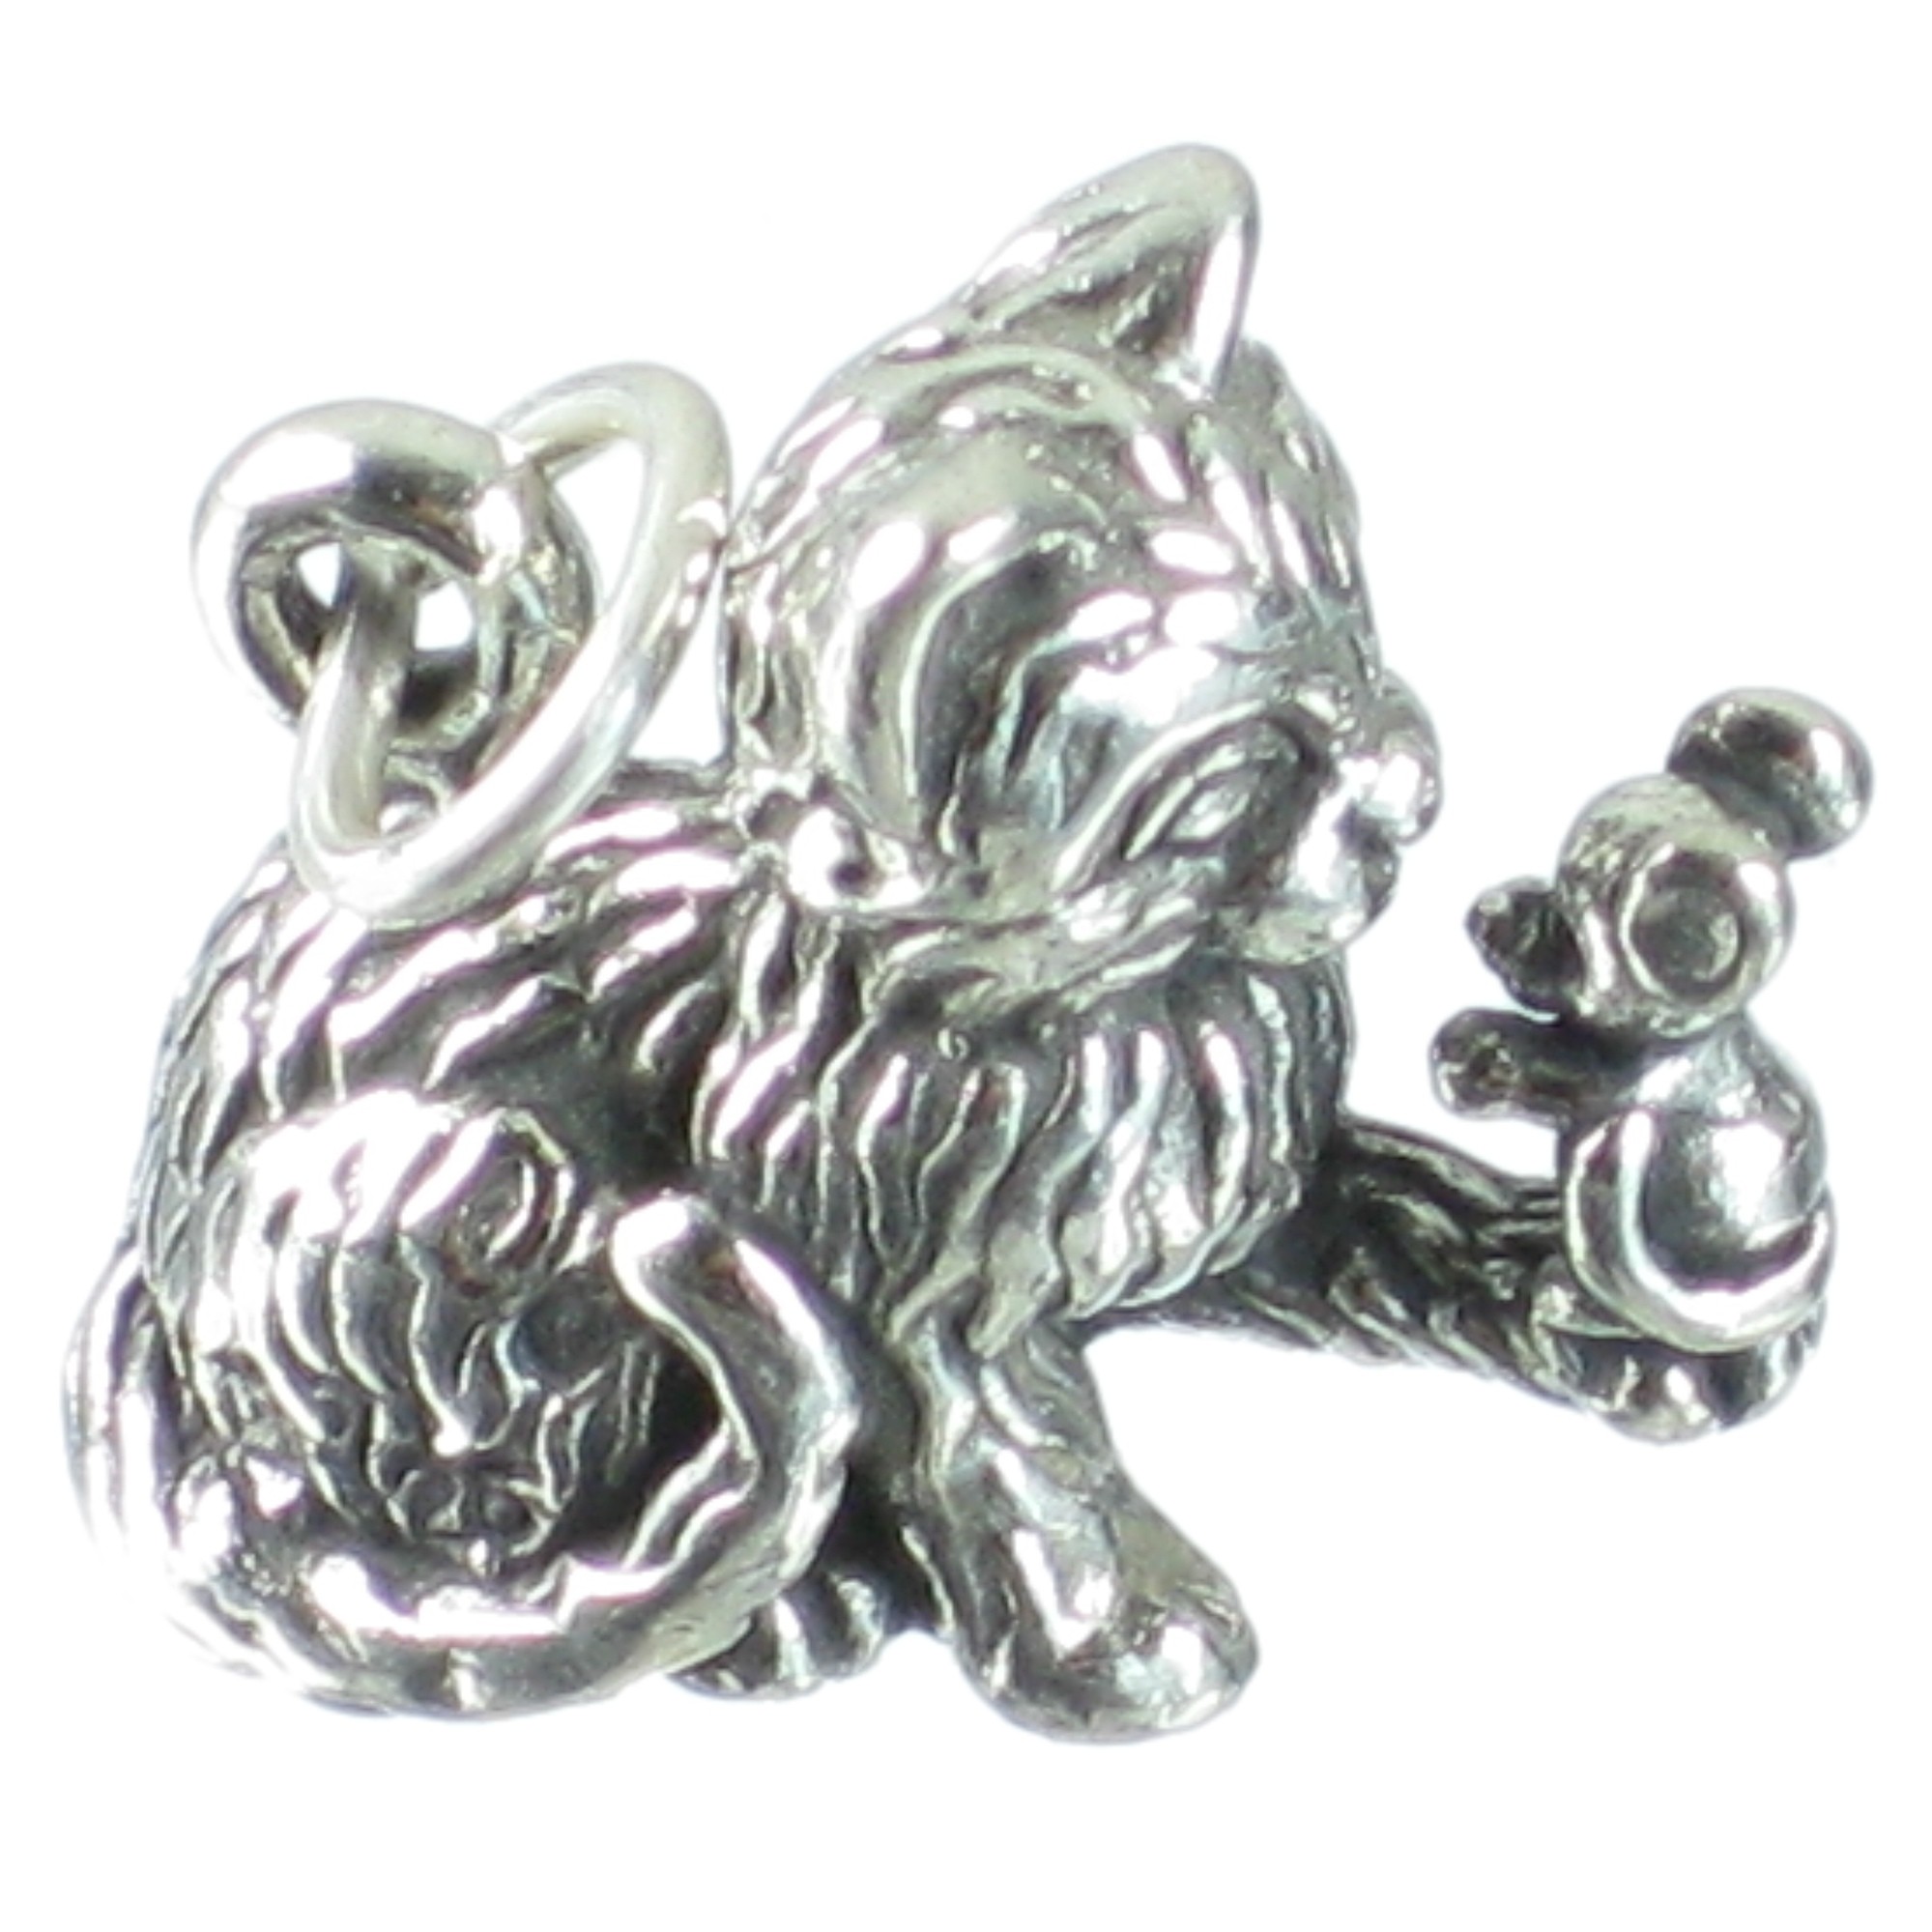 Cat playing with a mouse sterling silver charm .925 x 1 Cats charms